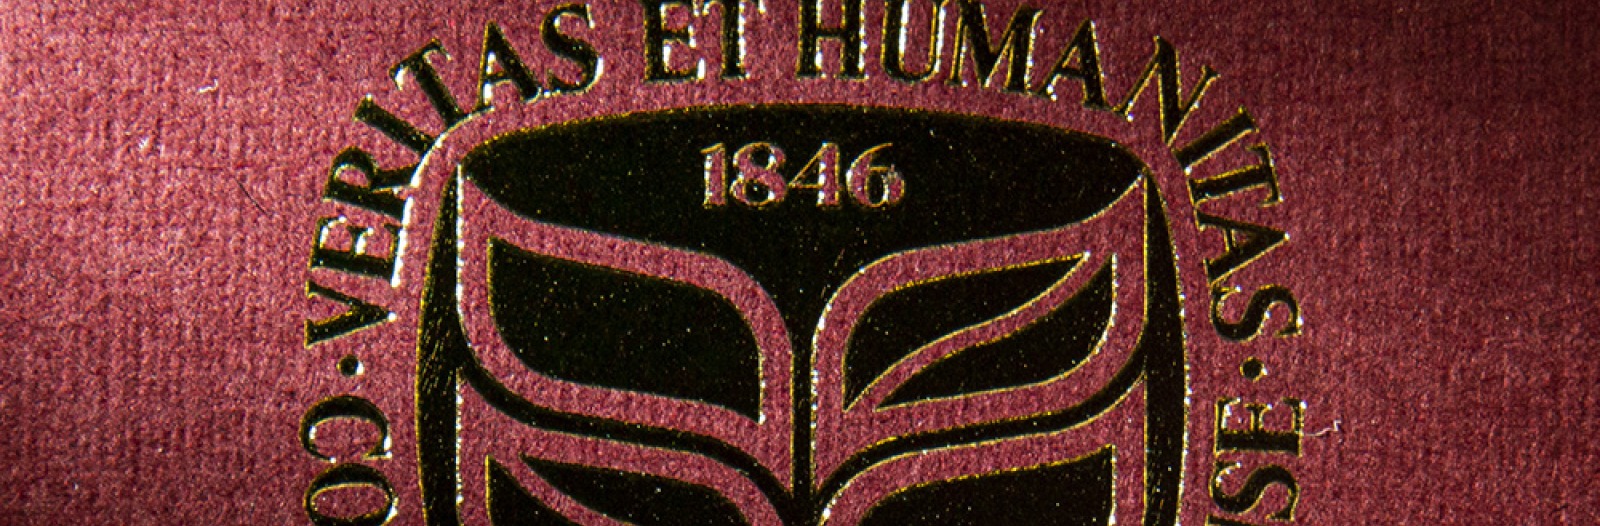 Grinnell College seal embossed in gold ink